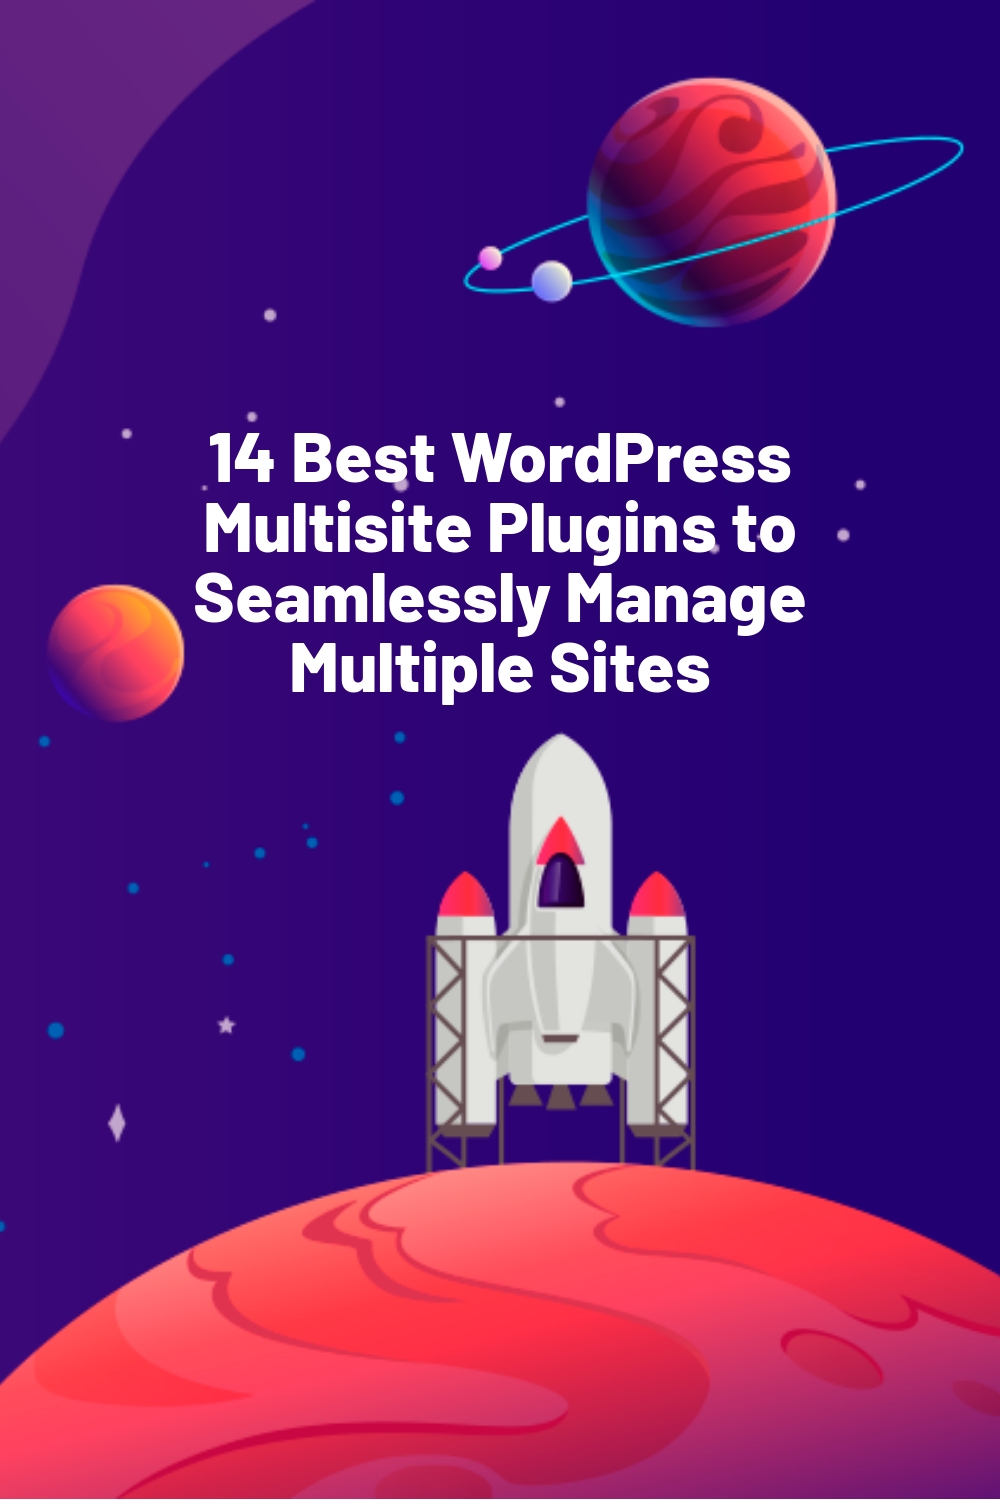 14 Best WordPress Multisite Plugins to Seamlessly Manage Multiple Sites